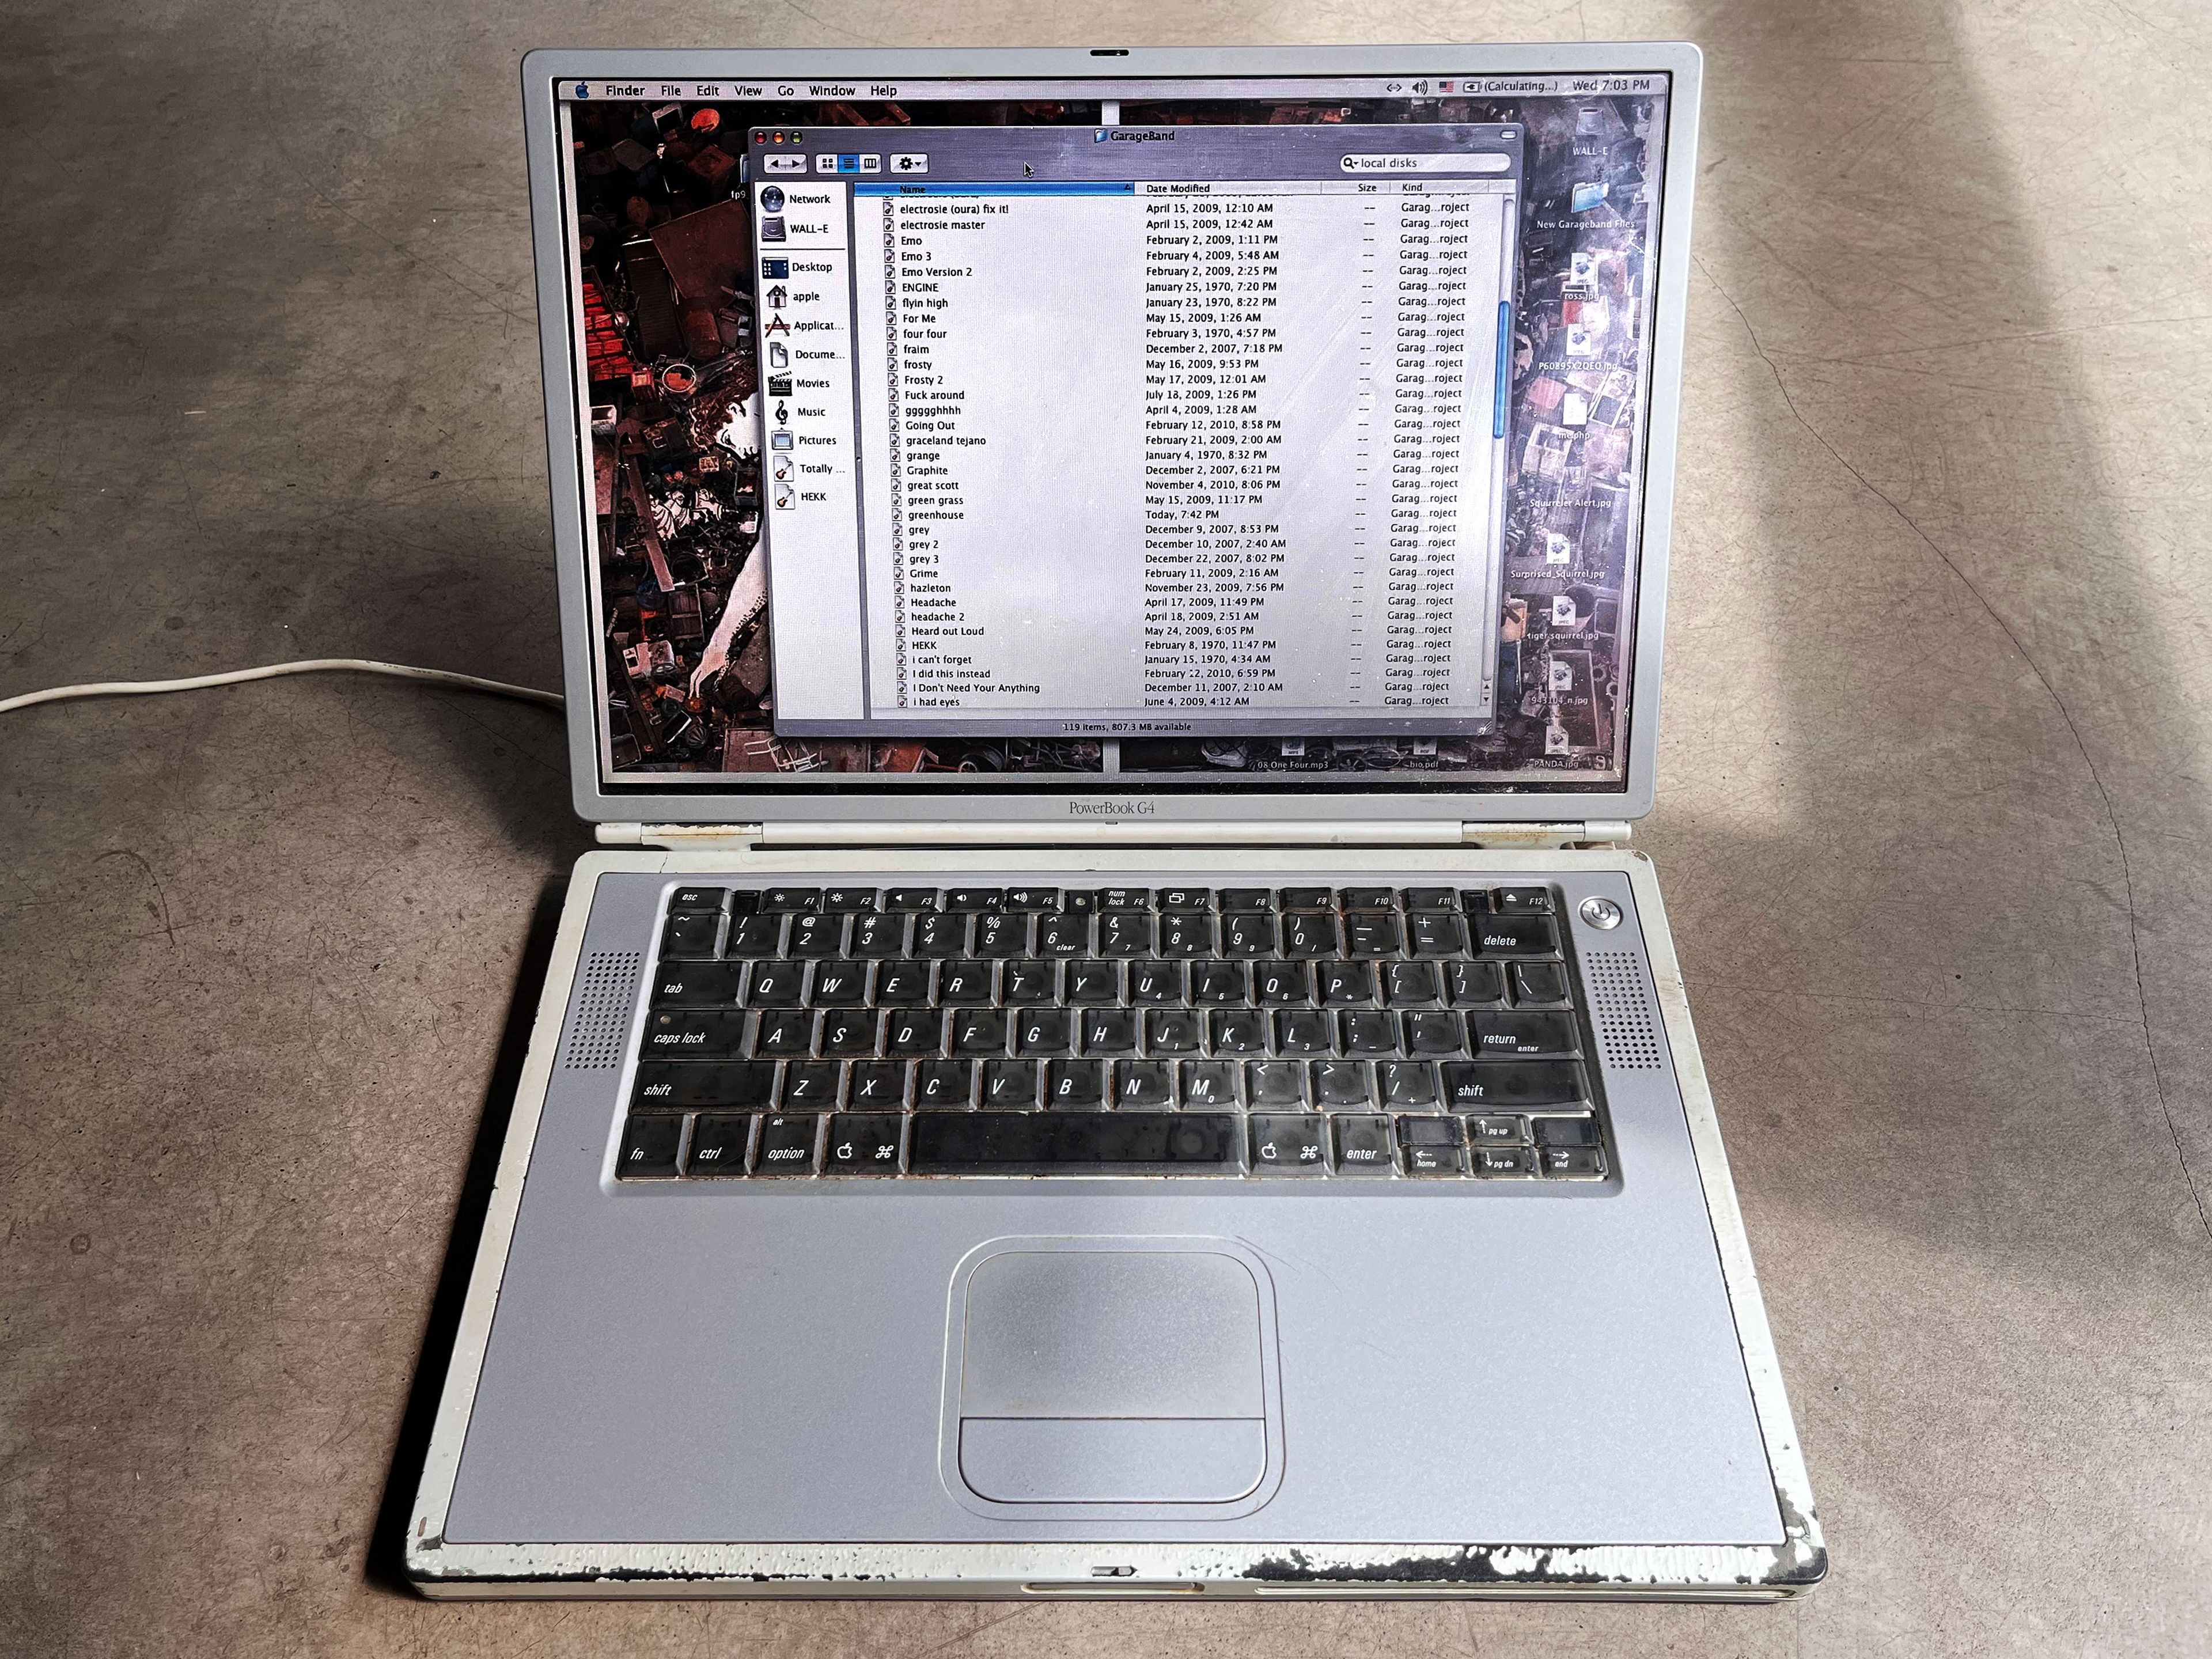 PowerBook G4 laptop with file directories shown